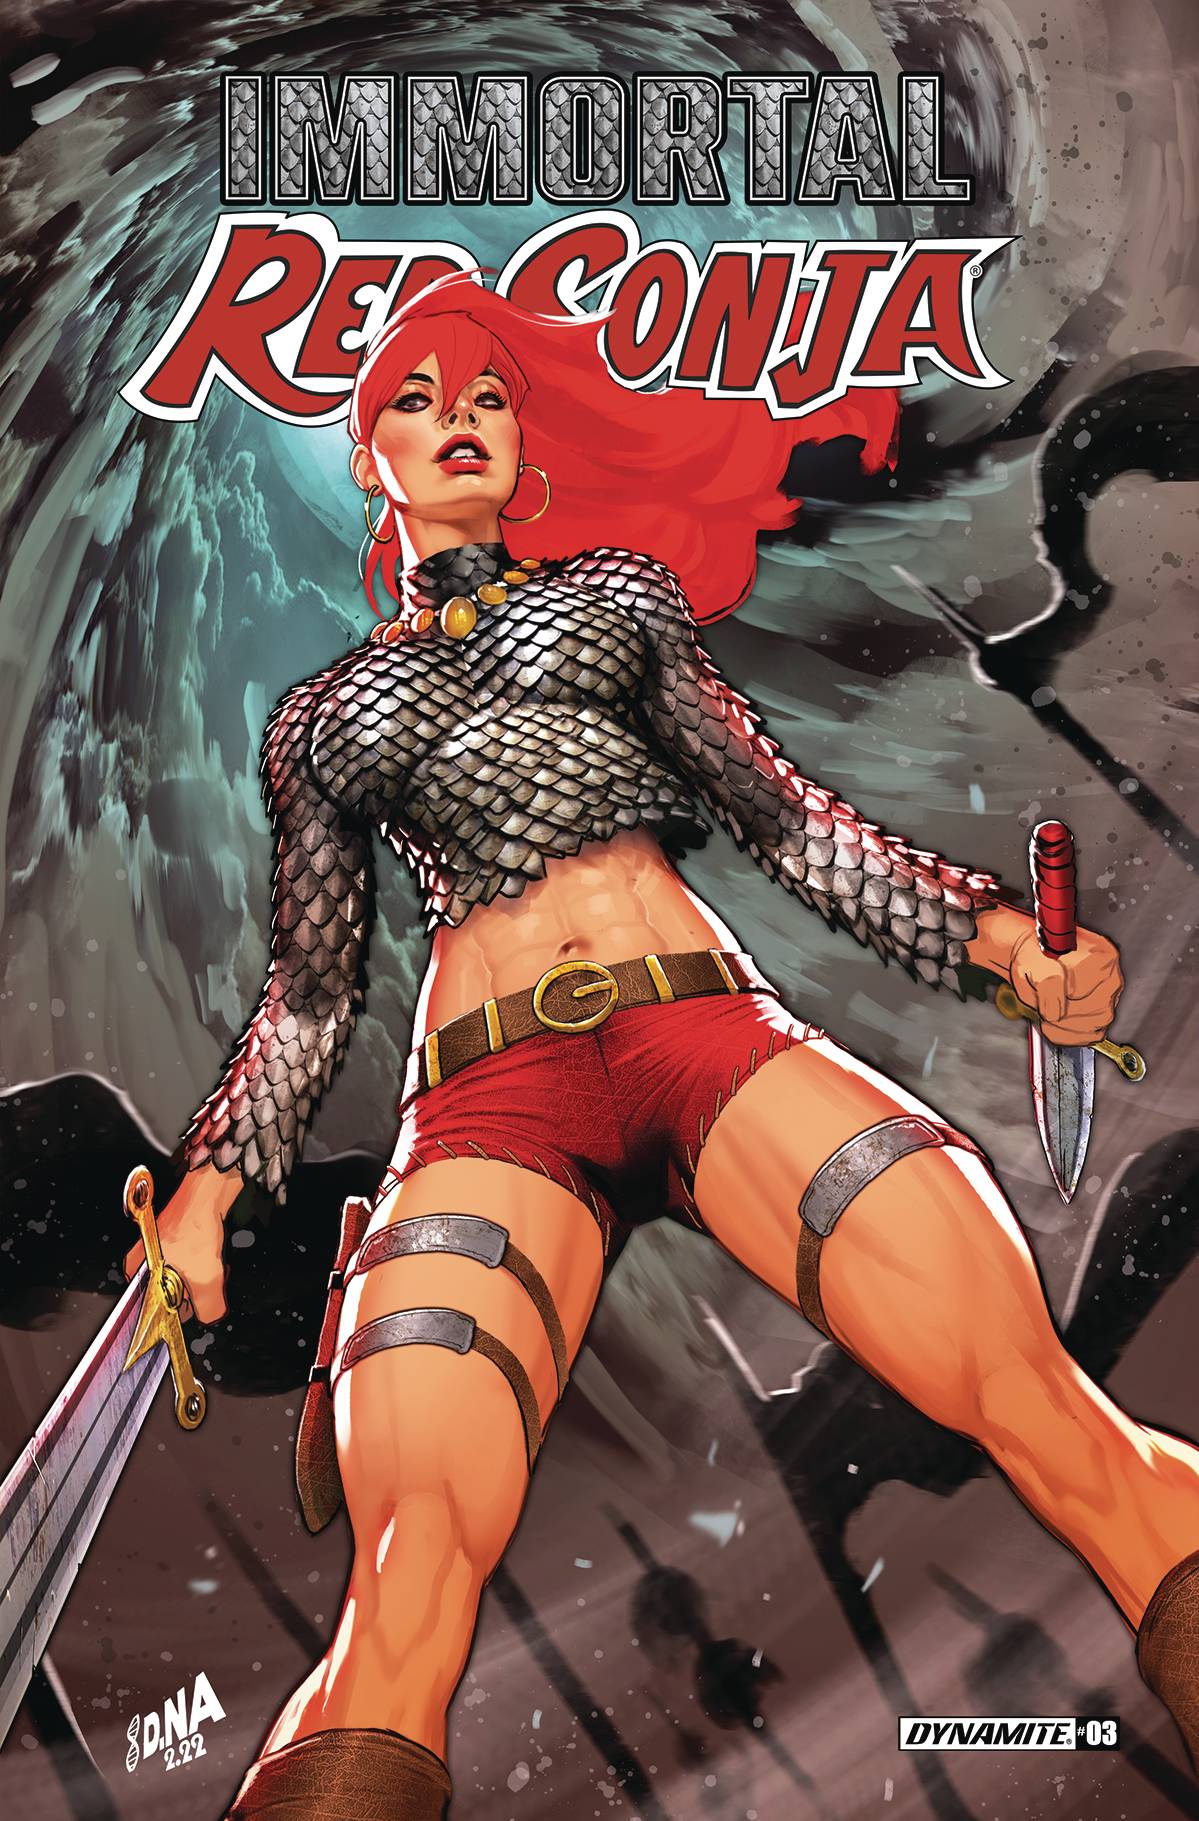 RED SONJA #3 COVER E COSPLAY DYNAMITE 1ST PRINT PHOTO 